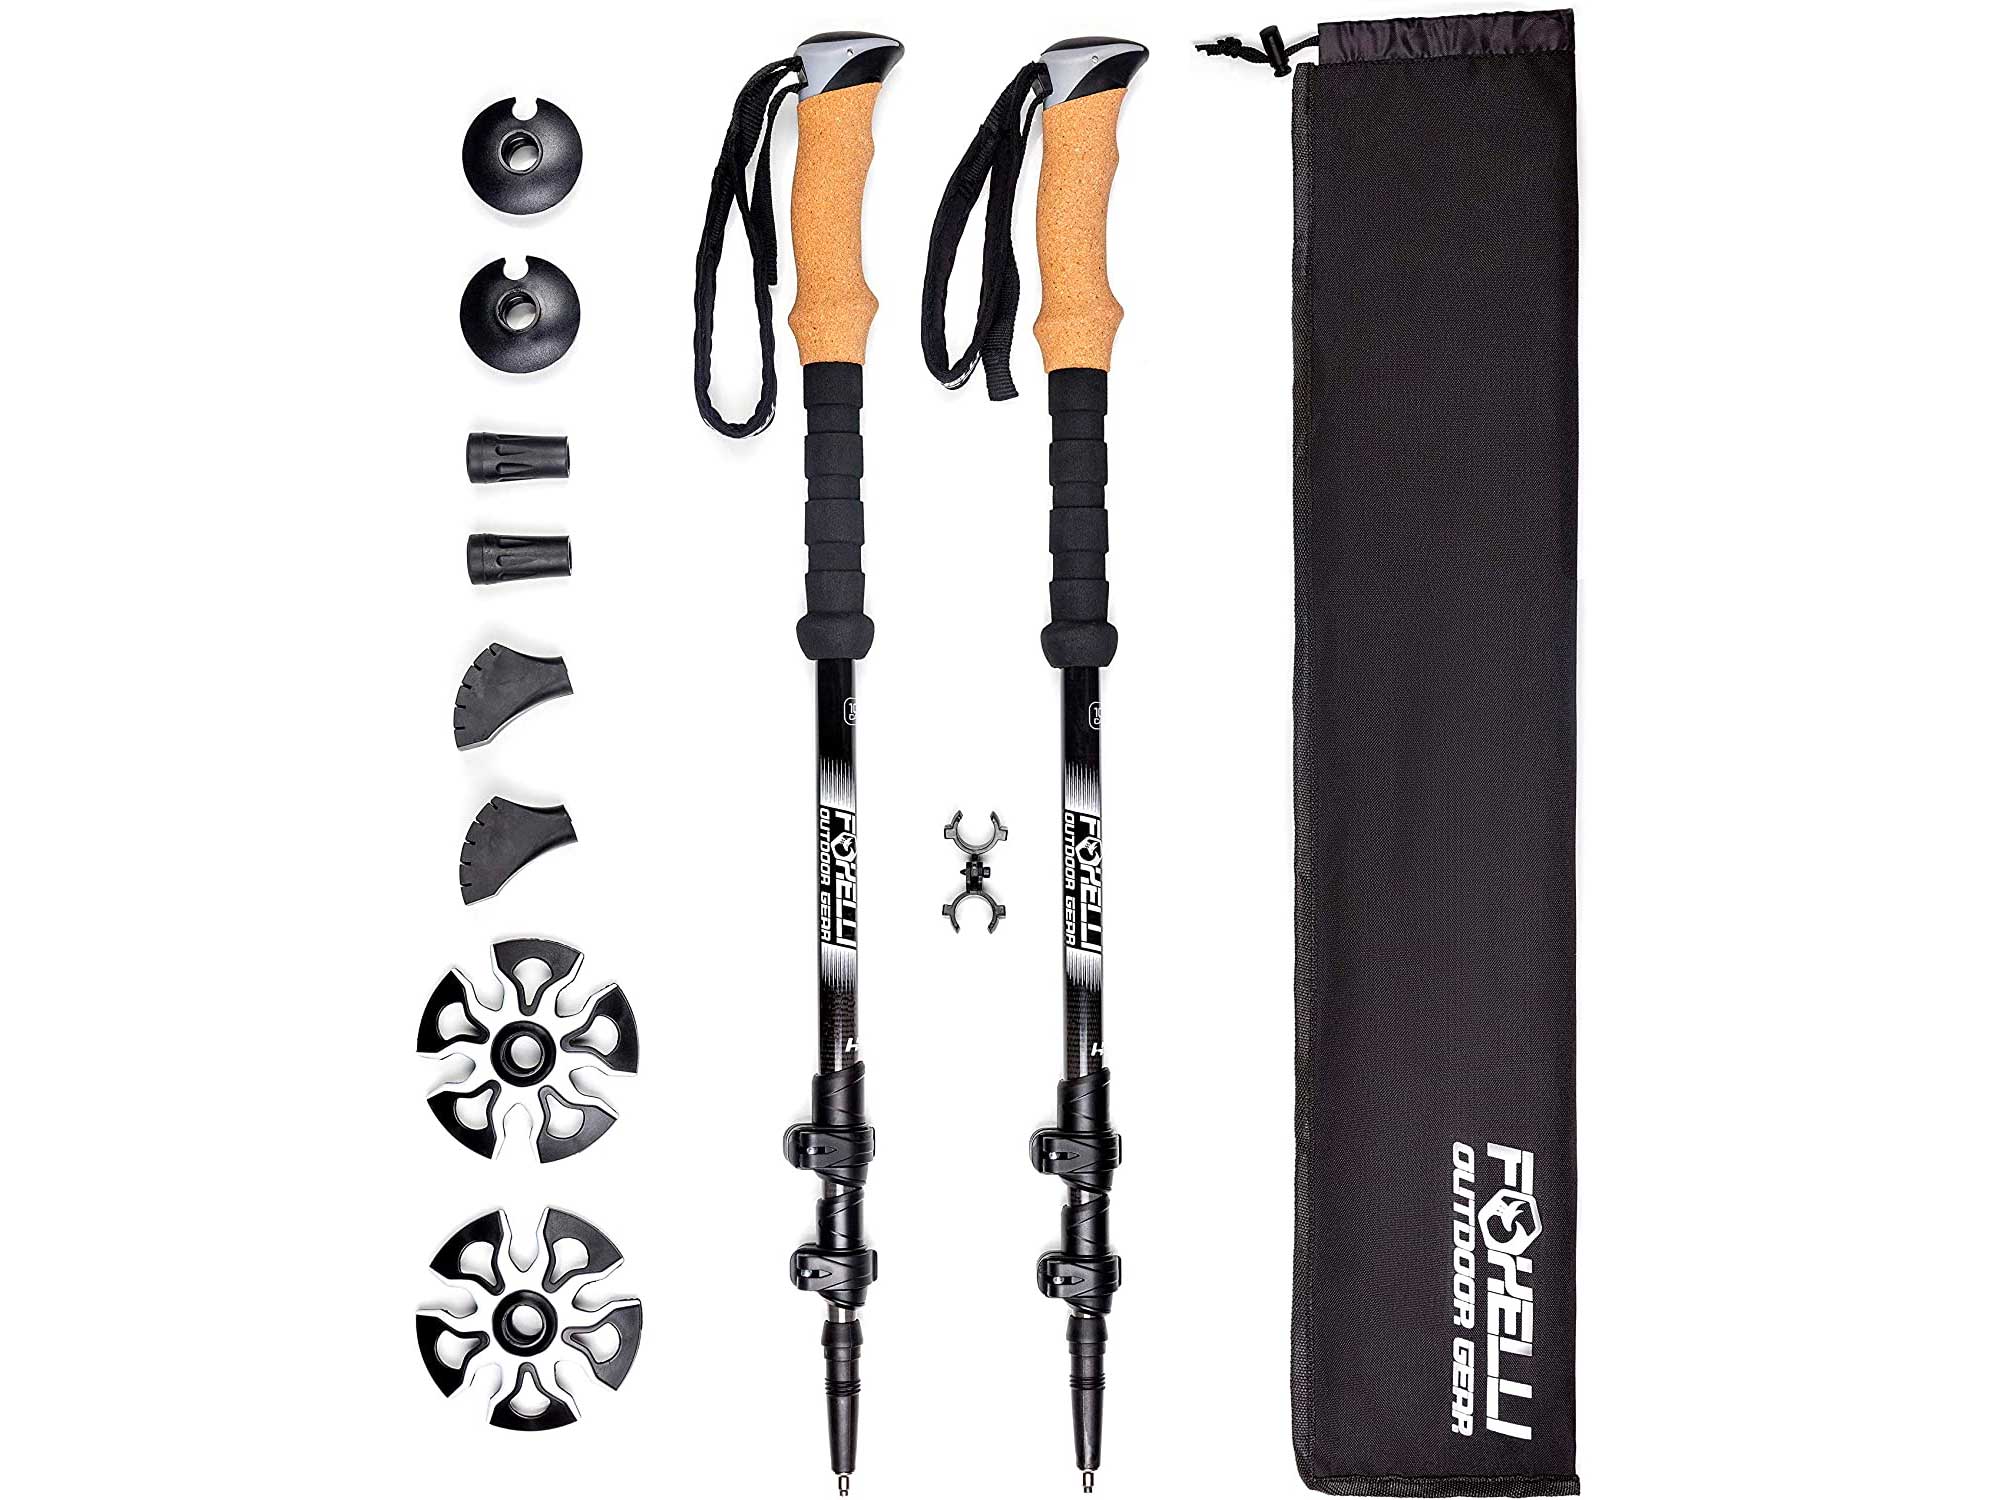 Foxelli Carbon Fiber Trekking Poles – Collapsible, Lightweight, Shock-Absorbent, Hiking, Walking & Running Sticks with Natural Cork Grips, Quick Locks, 4 Season/All Terrain Accessories and Carry Bag